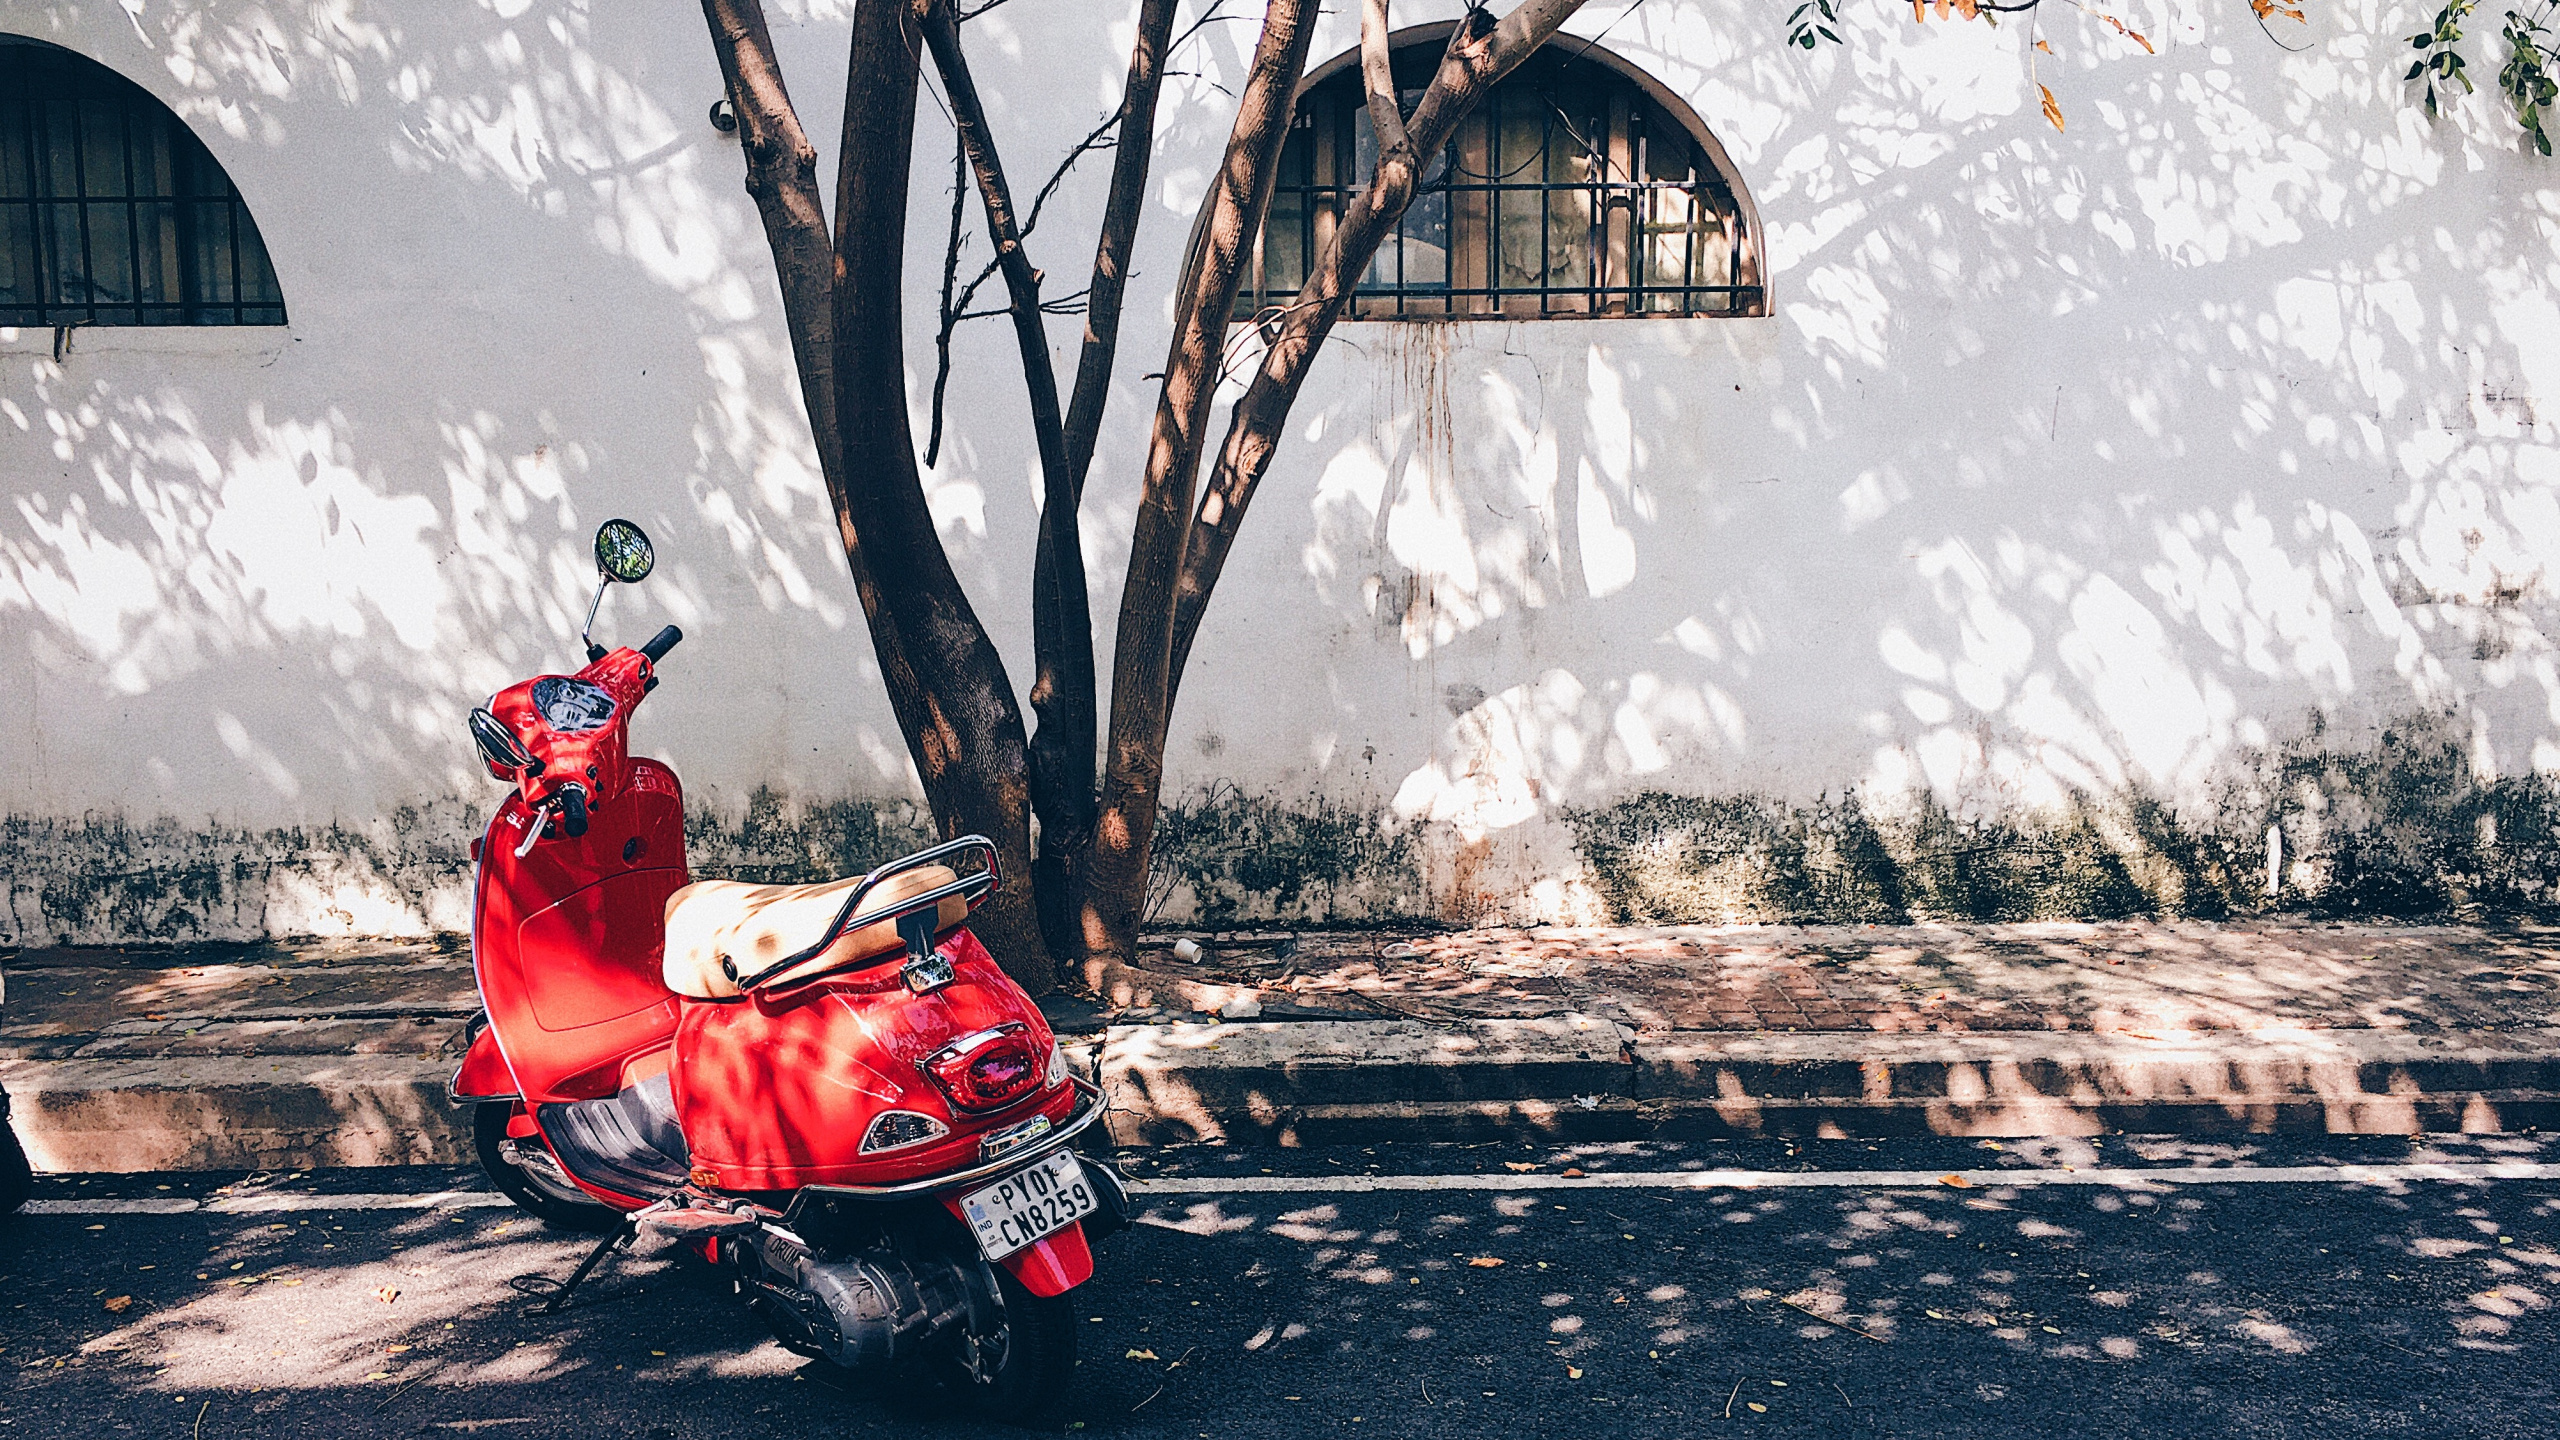 Man in Red Jacket Riding Red Motor Scooter on Road During Daytime. Wallpaper in 2560x1440 Resolution